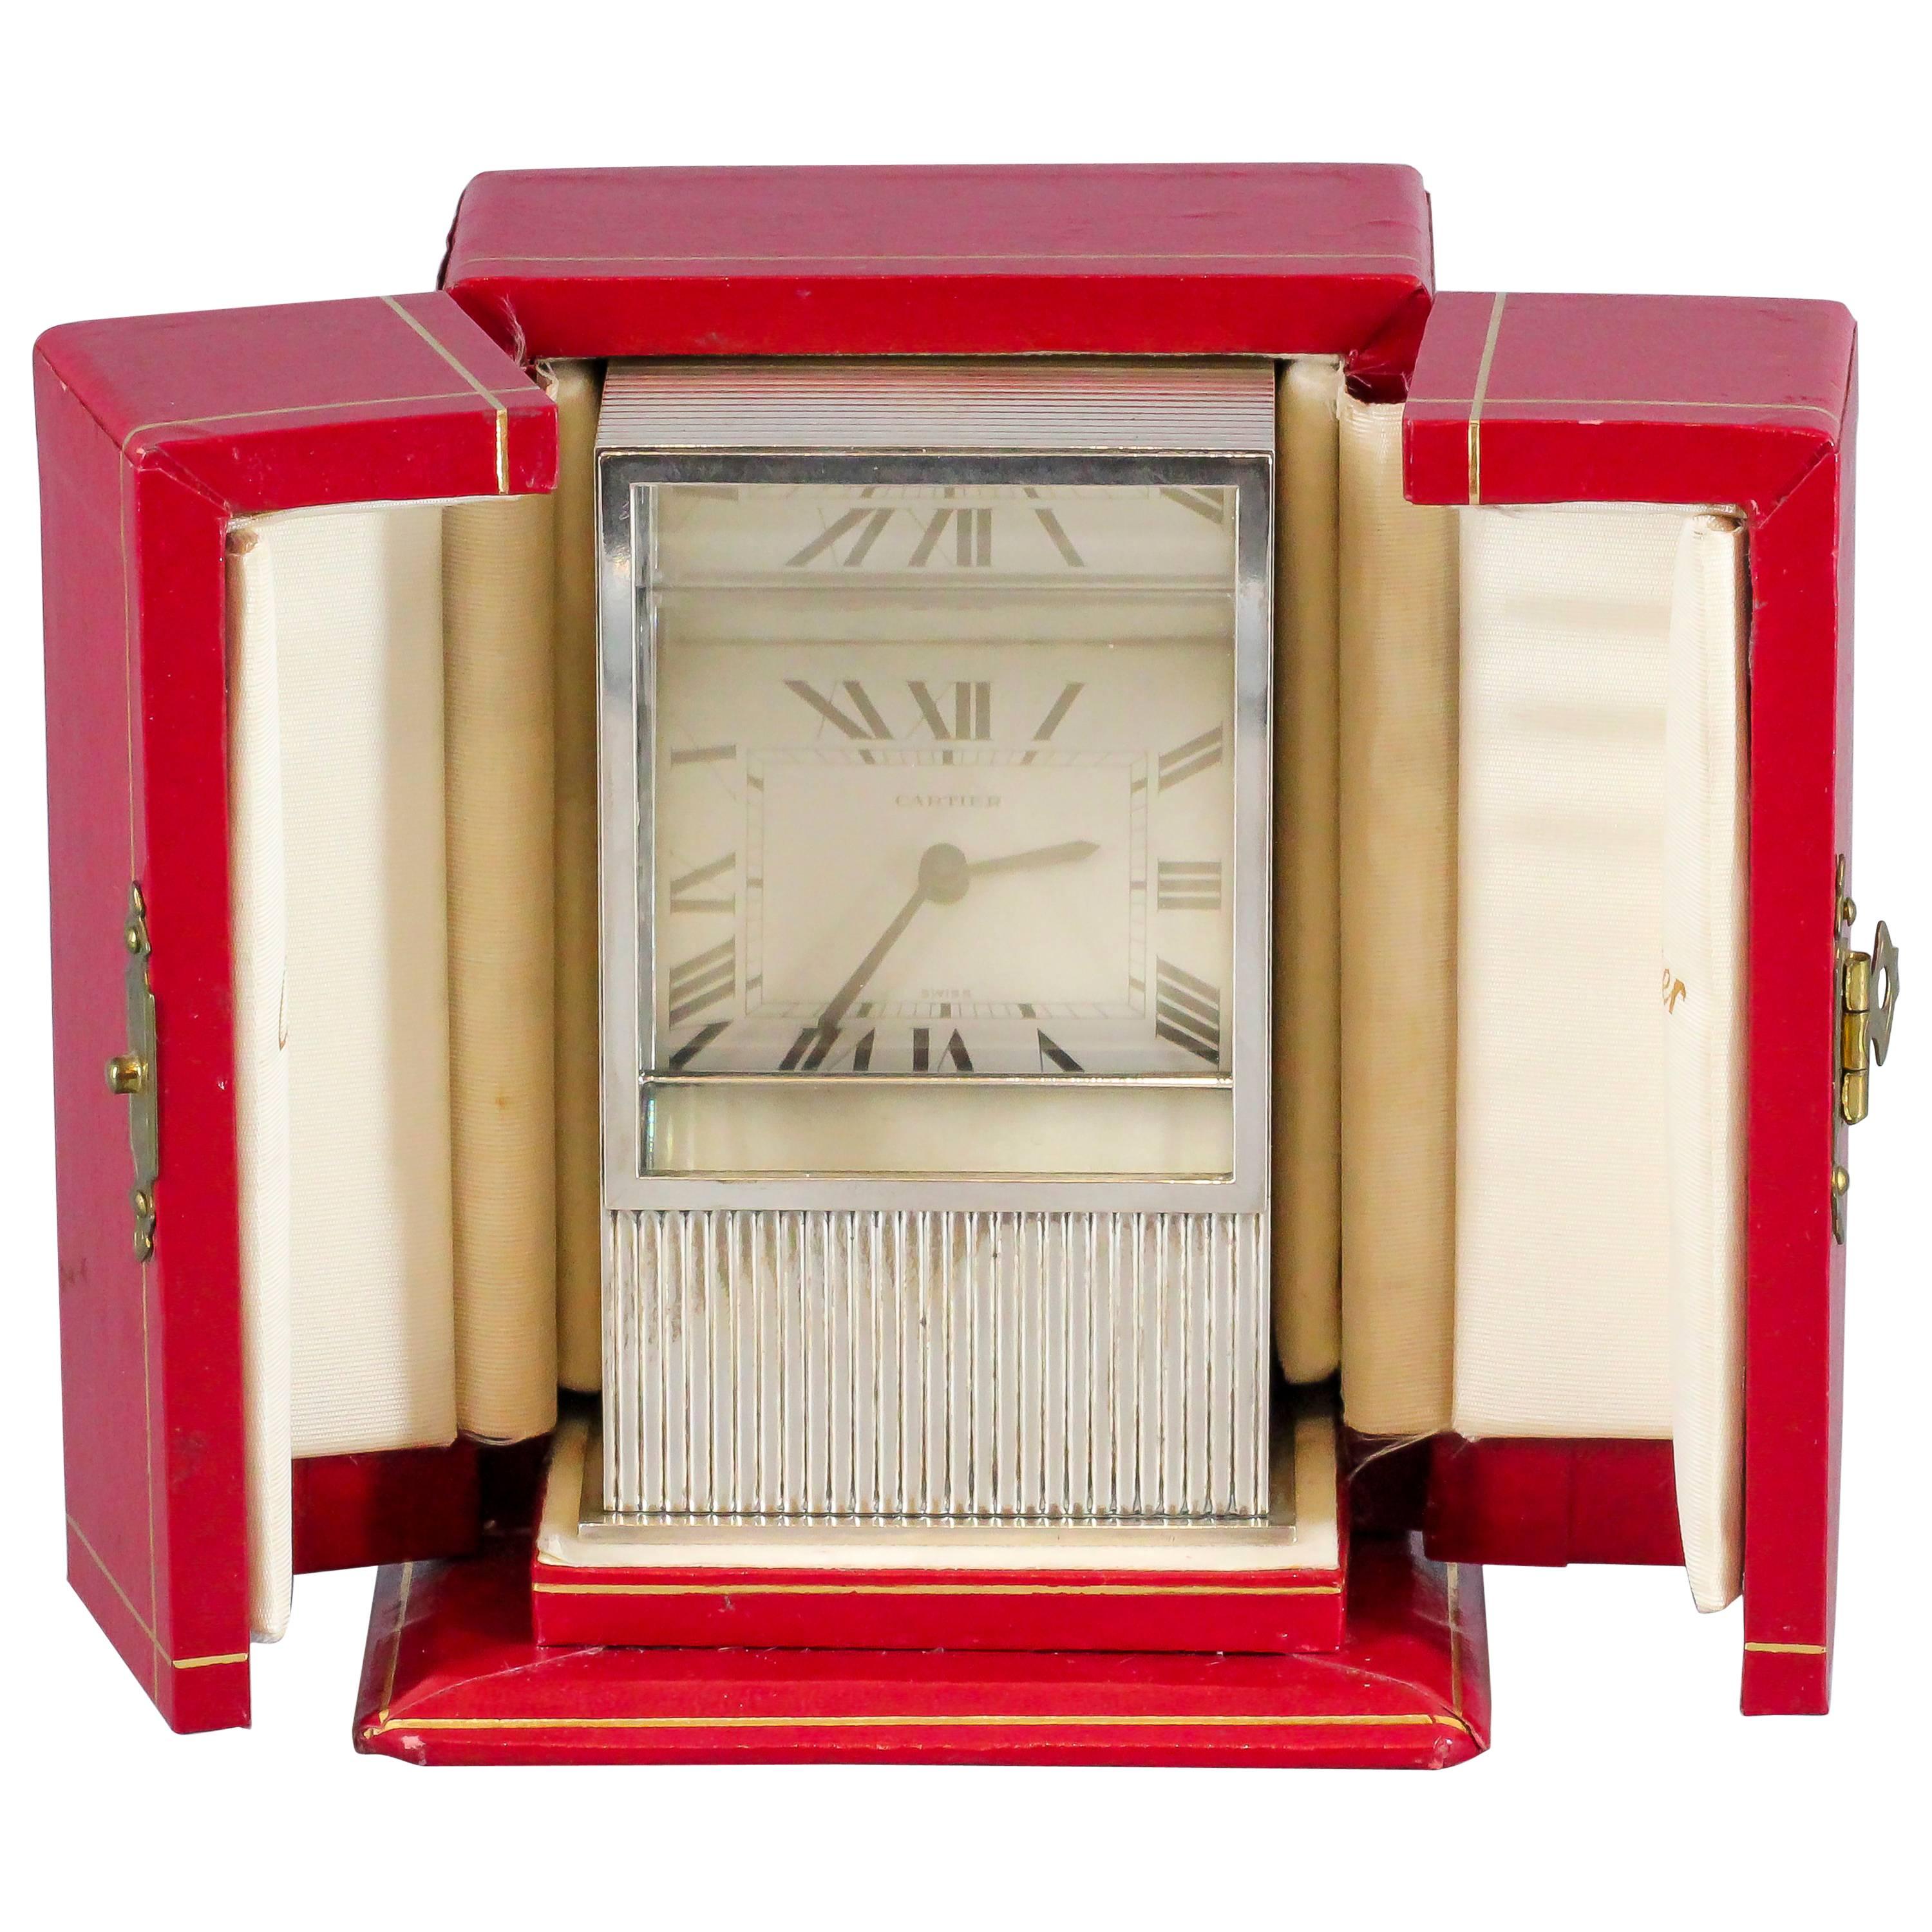 Unveiling Time: A Rare Cartier Mystery Prism Sterling Silver Clock (Circa 1980s)

Intrigue and elegance collide in this captivating Cartier Mystery Prism clock, a true rarity from the 1980s. This exquisite timepiece embodies the Maison's legendary